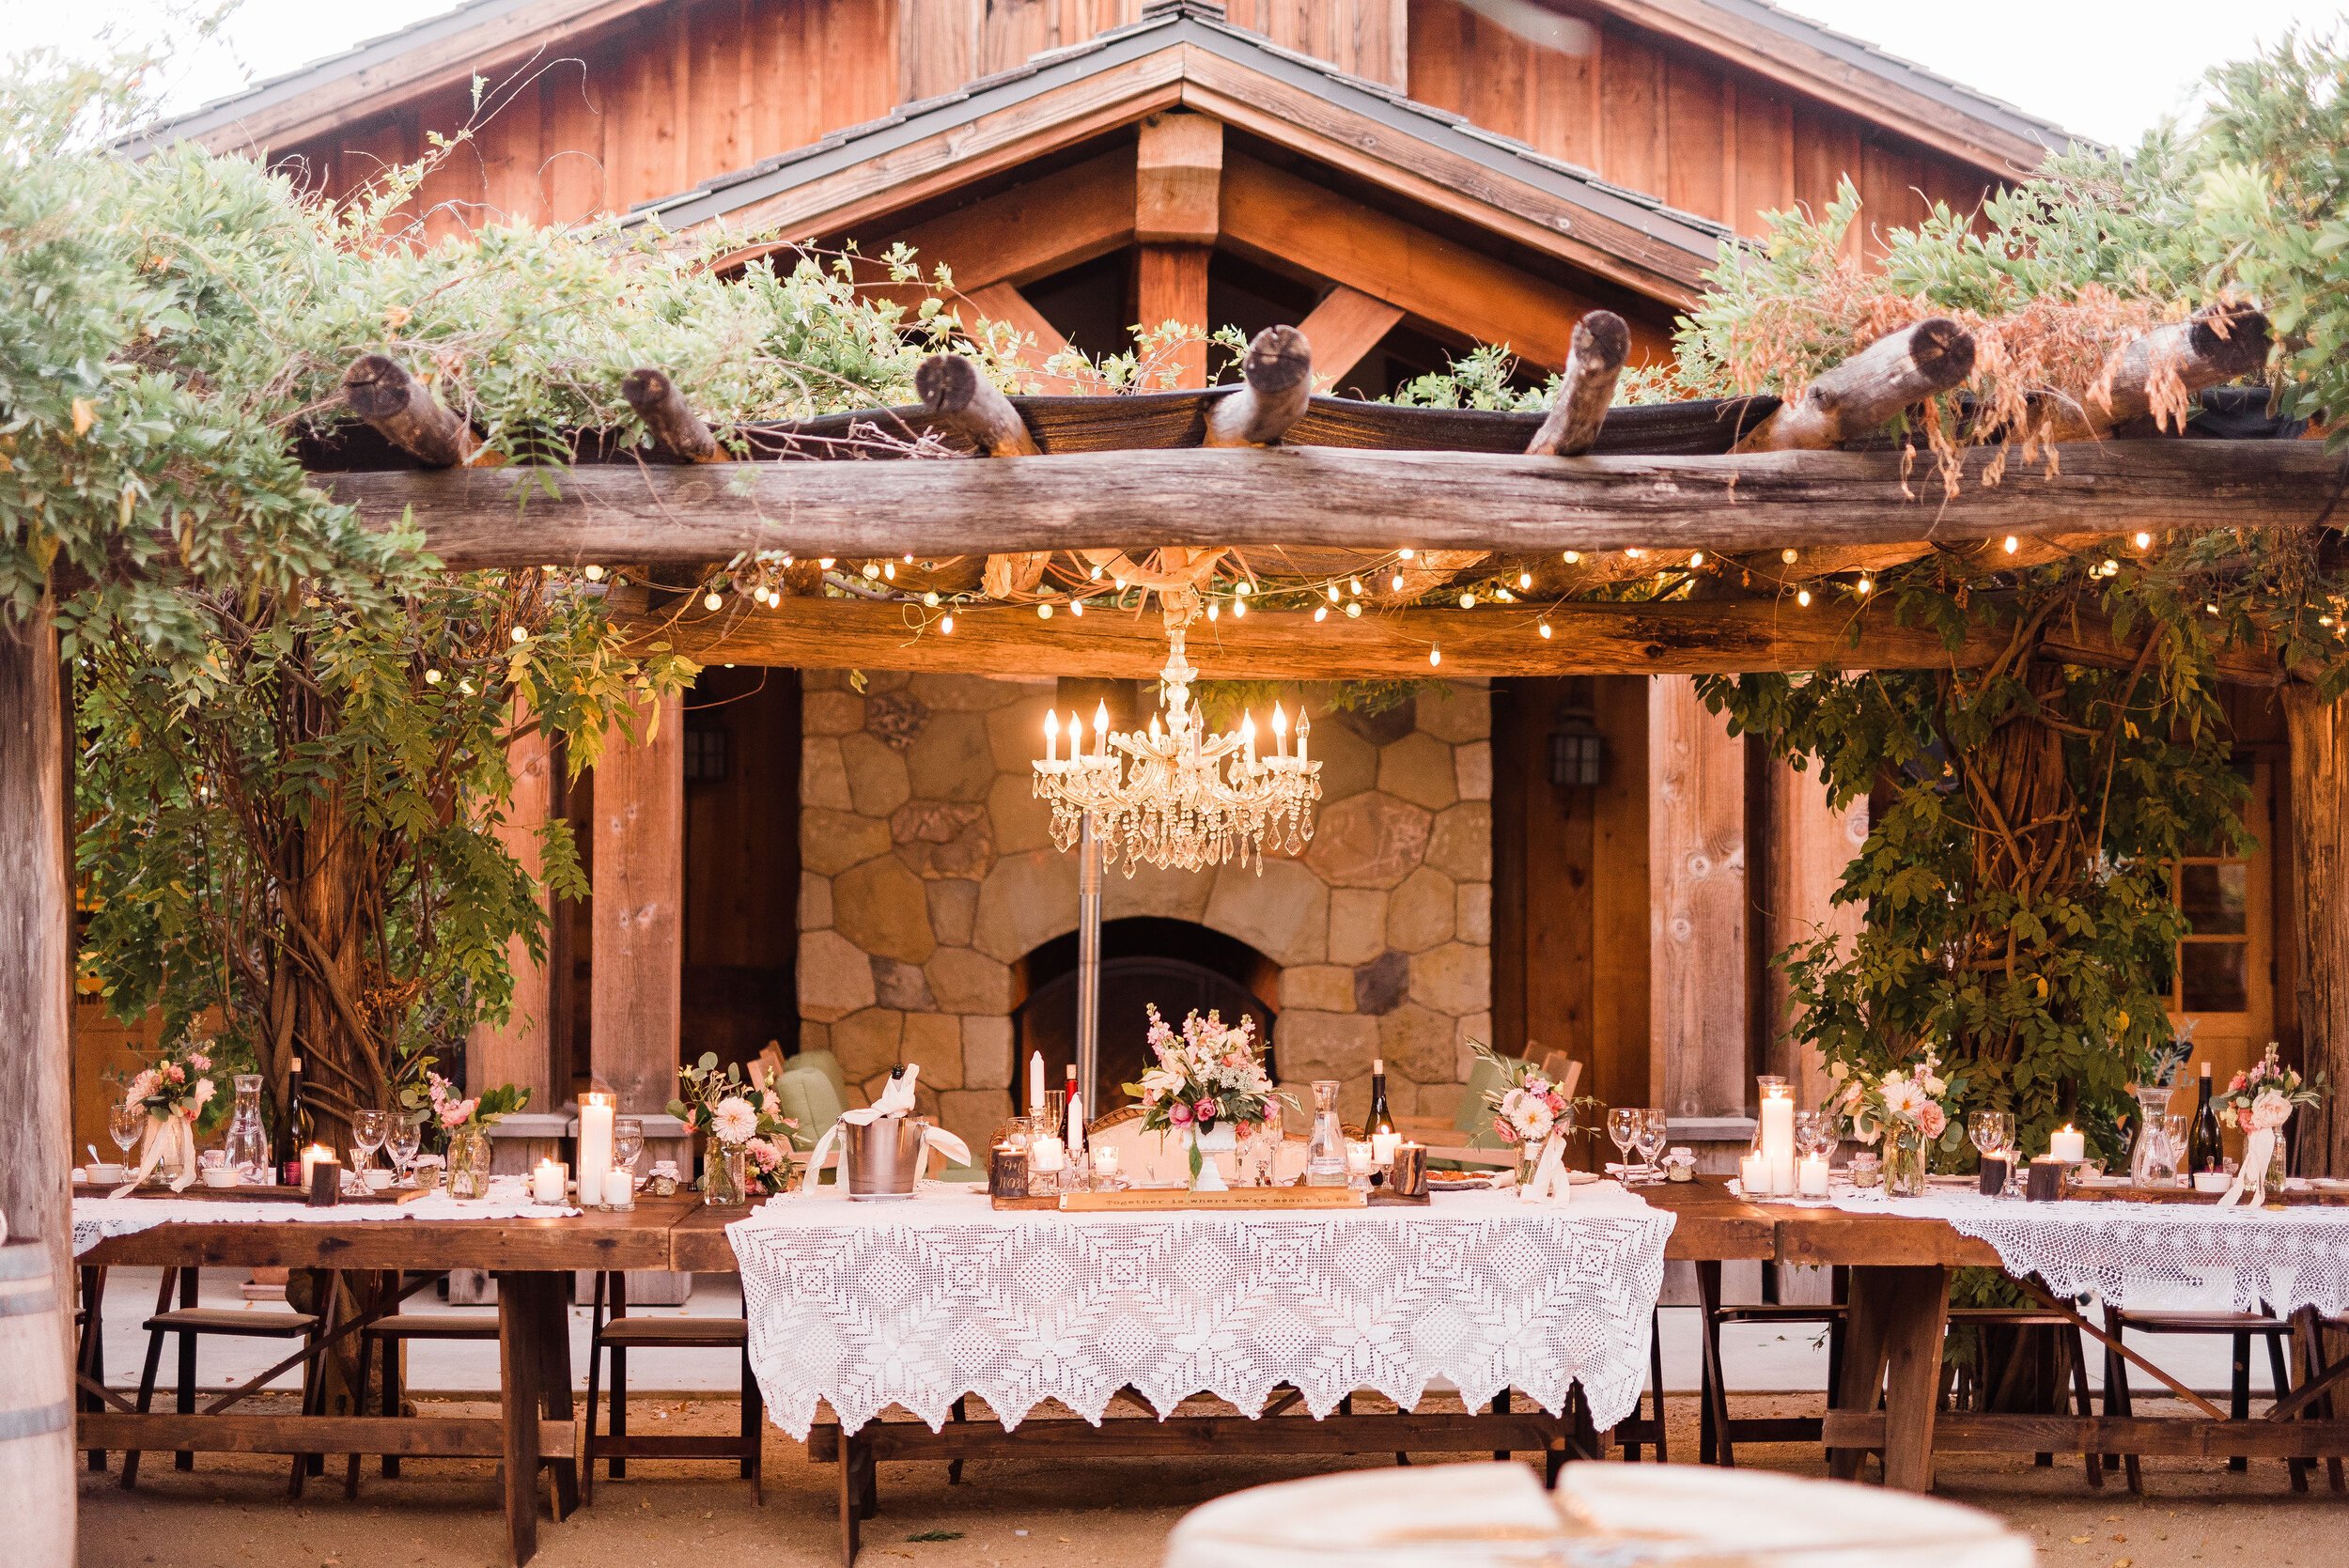 www.santabarbarawedding.com | Roblar Winery and Farm | Brittany Taylor Photography | Reception Tables with String Lights and Candles 